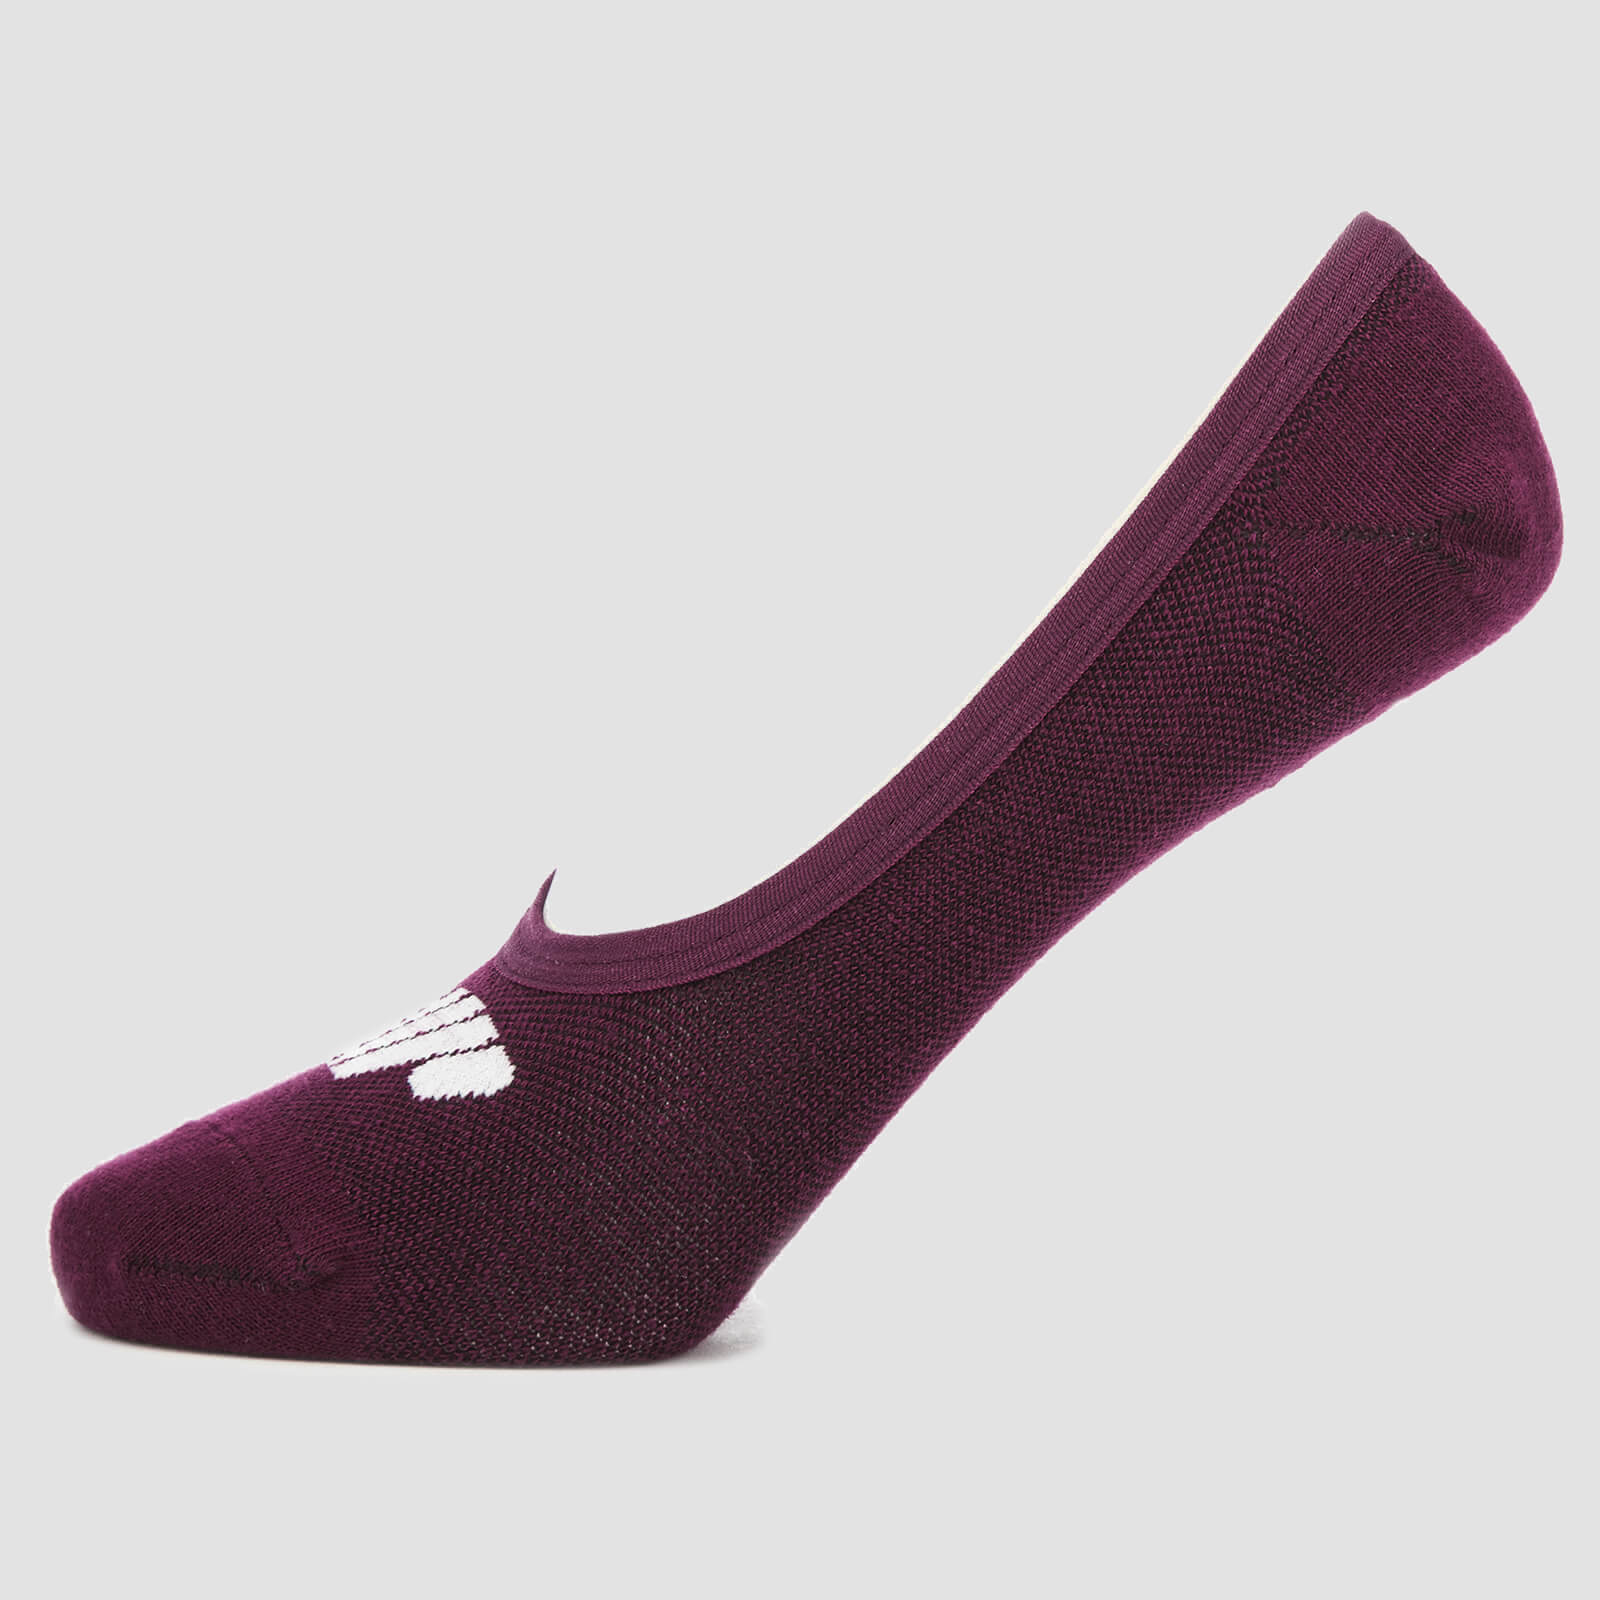 MP Women's No Show Socks - Mulberry (3 Pack)